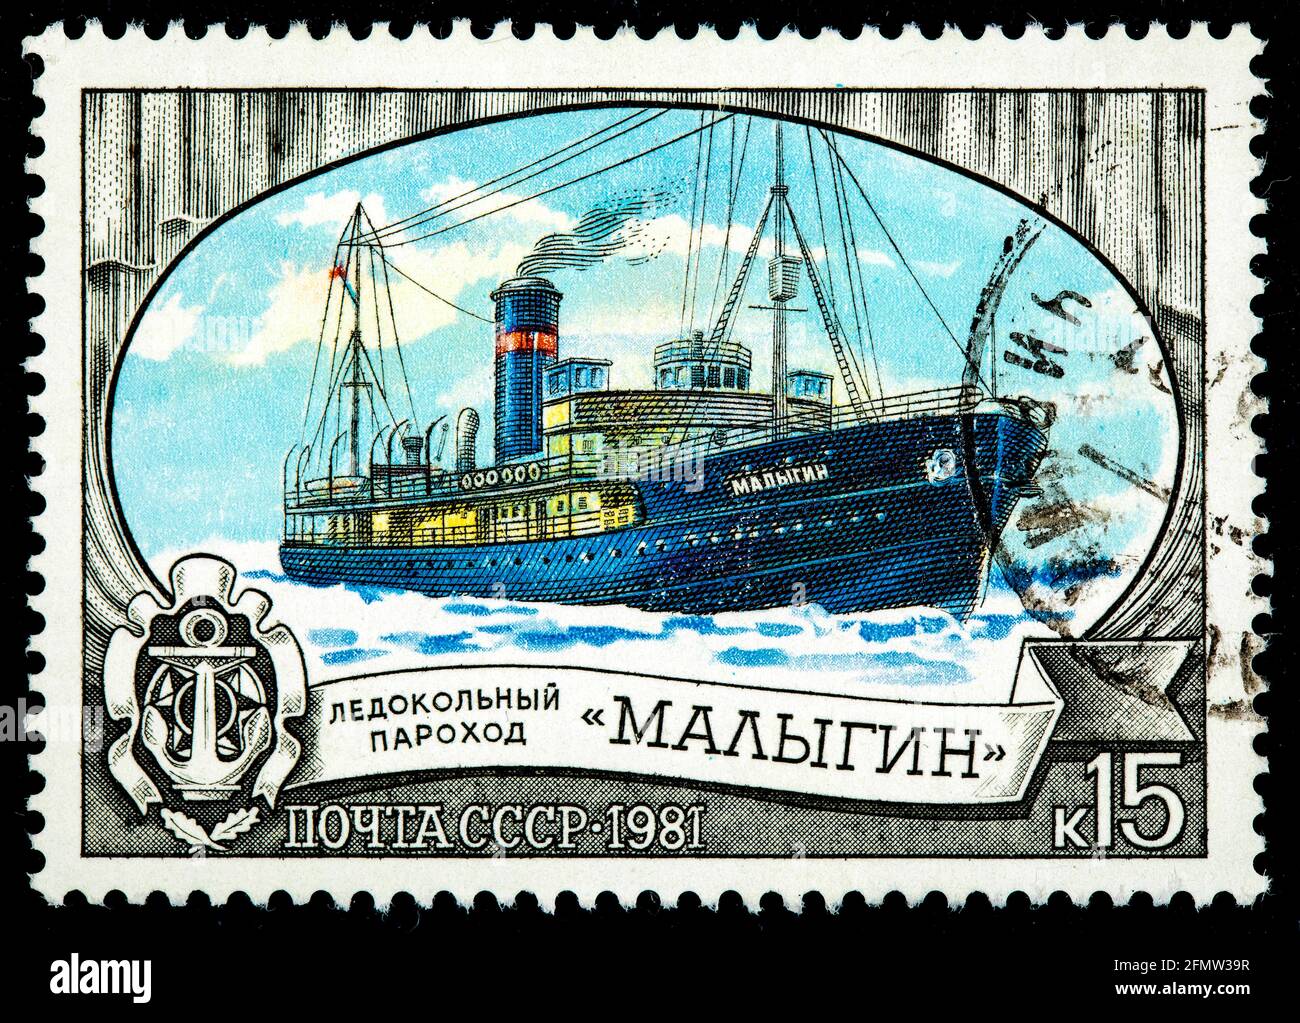 USSR - CIRCA 1977: A stamp printed in USSR shows the Russian icebreaker ship Lena breaking up ice in the Arctic, circa 1977 Stock Photo